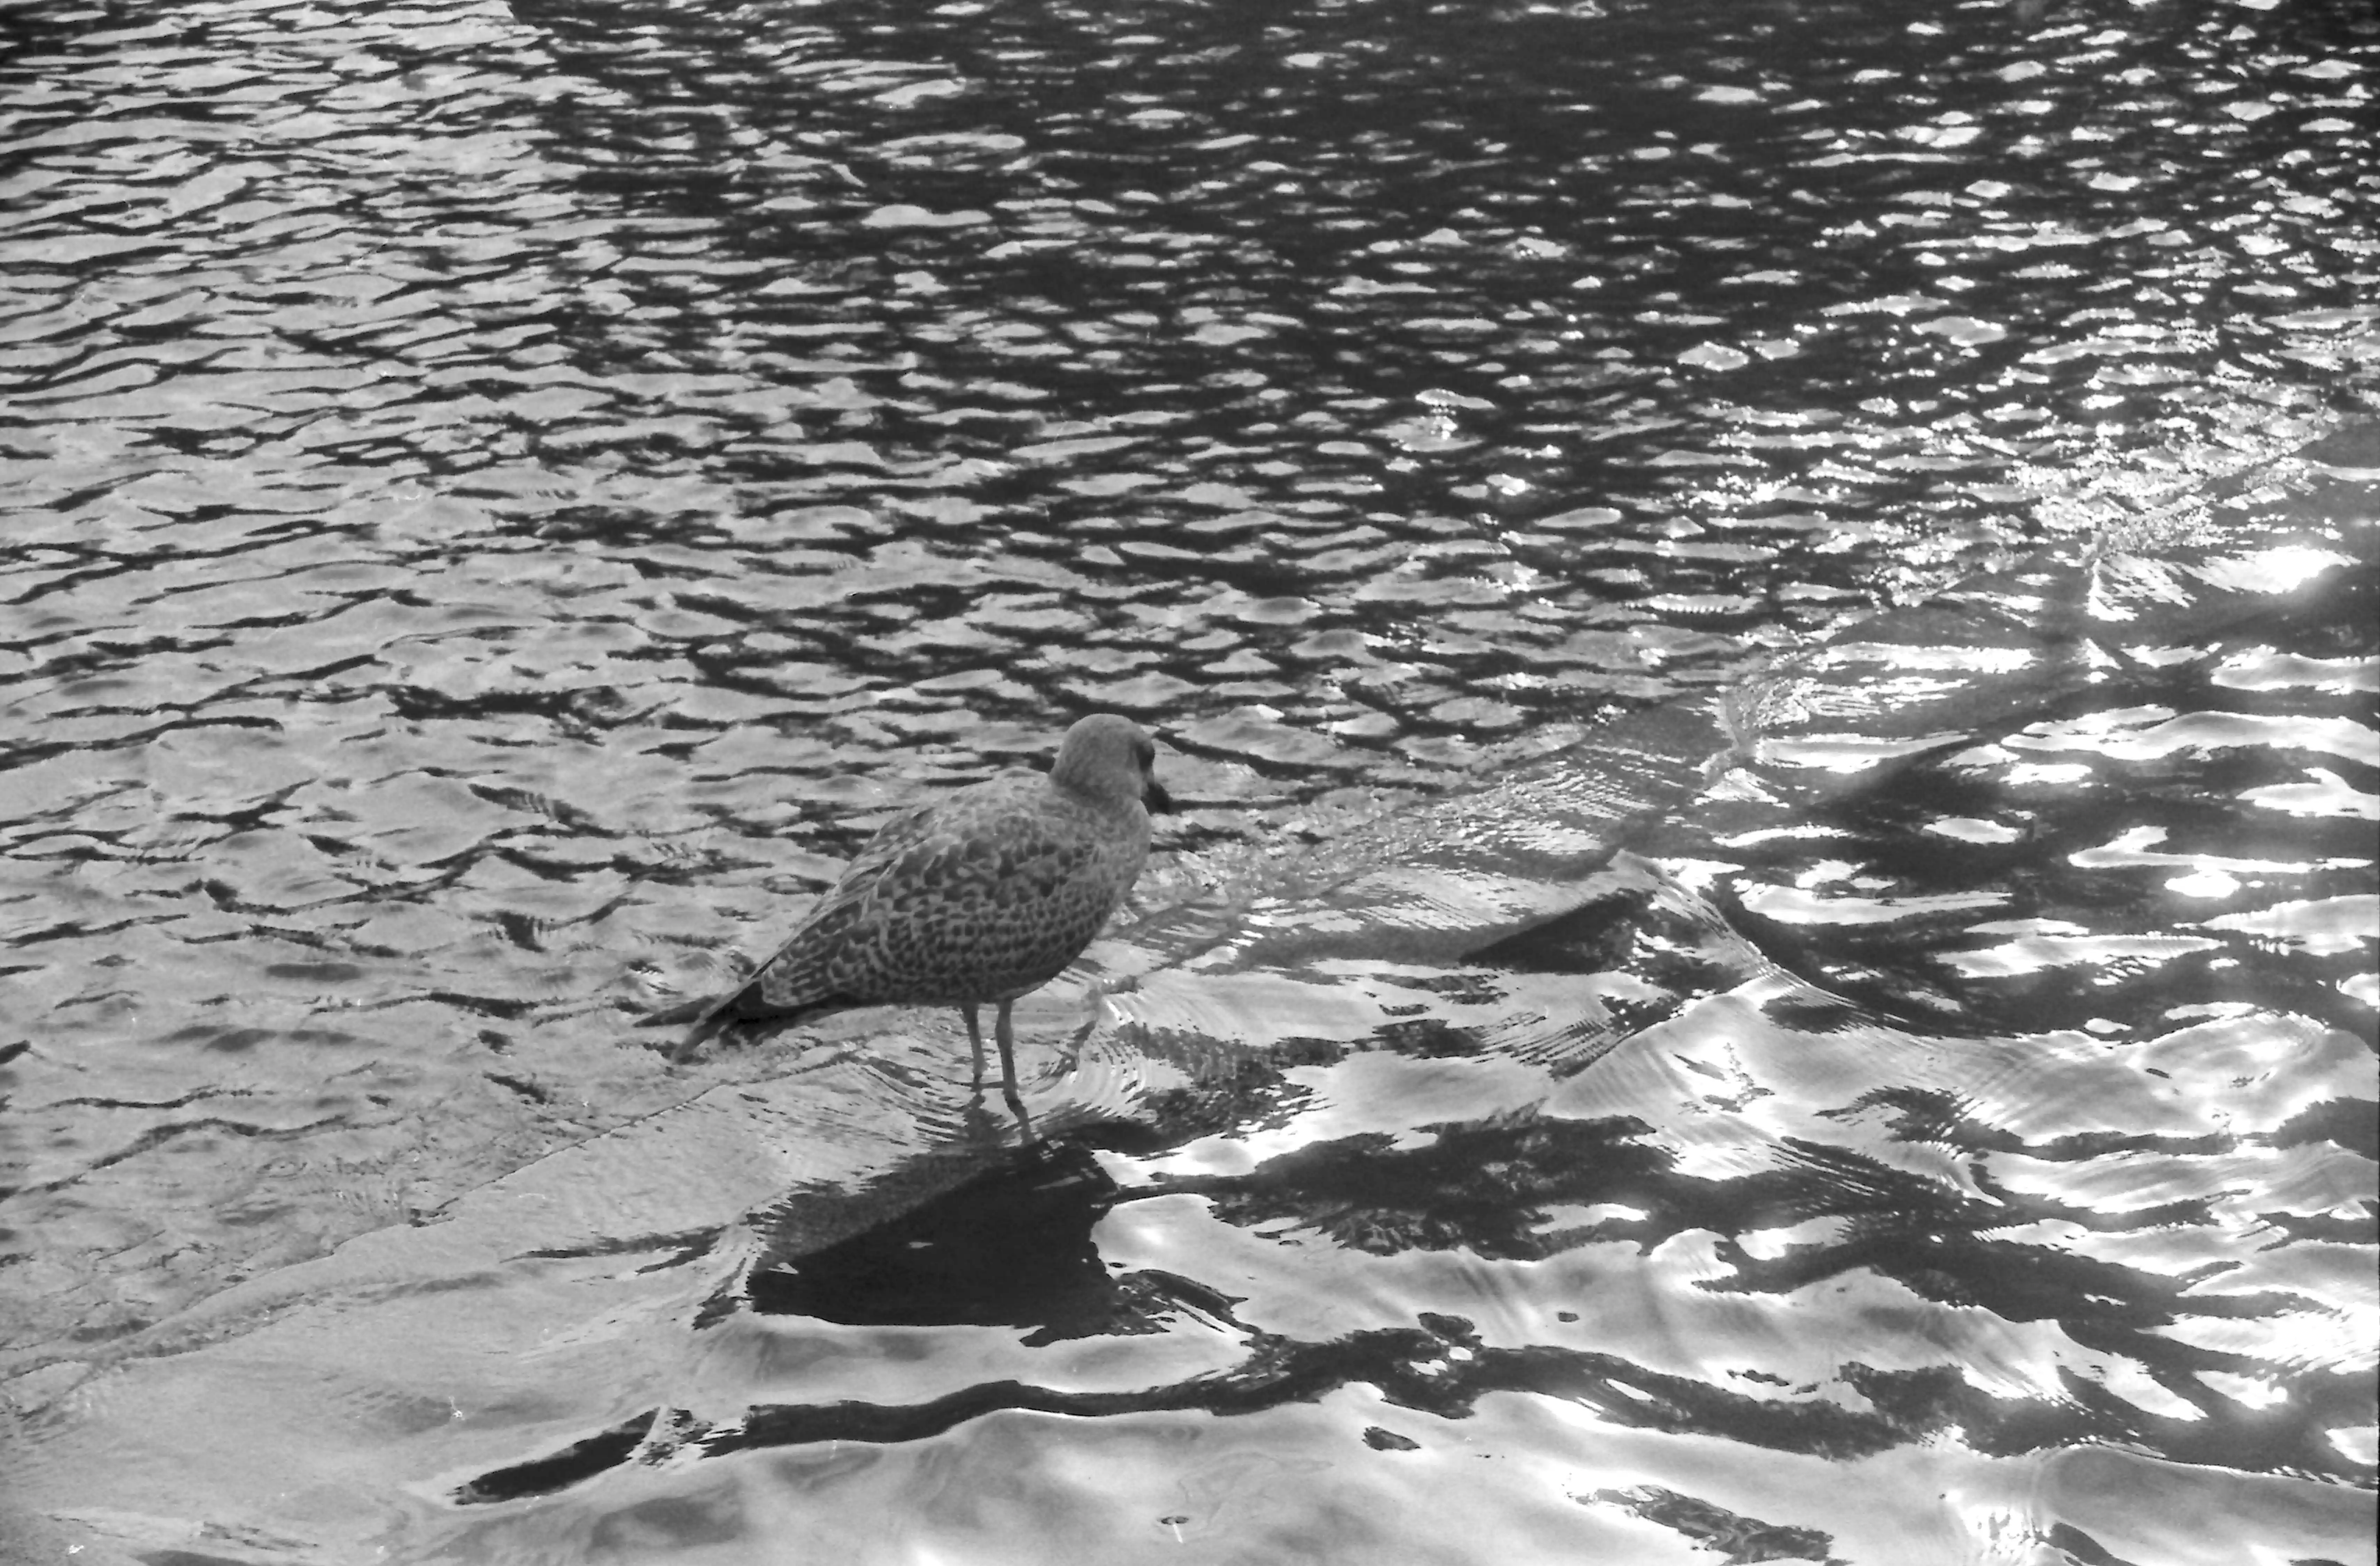 Black and white picture of a bird in a body of water